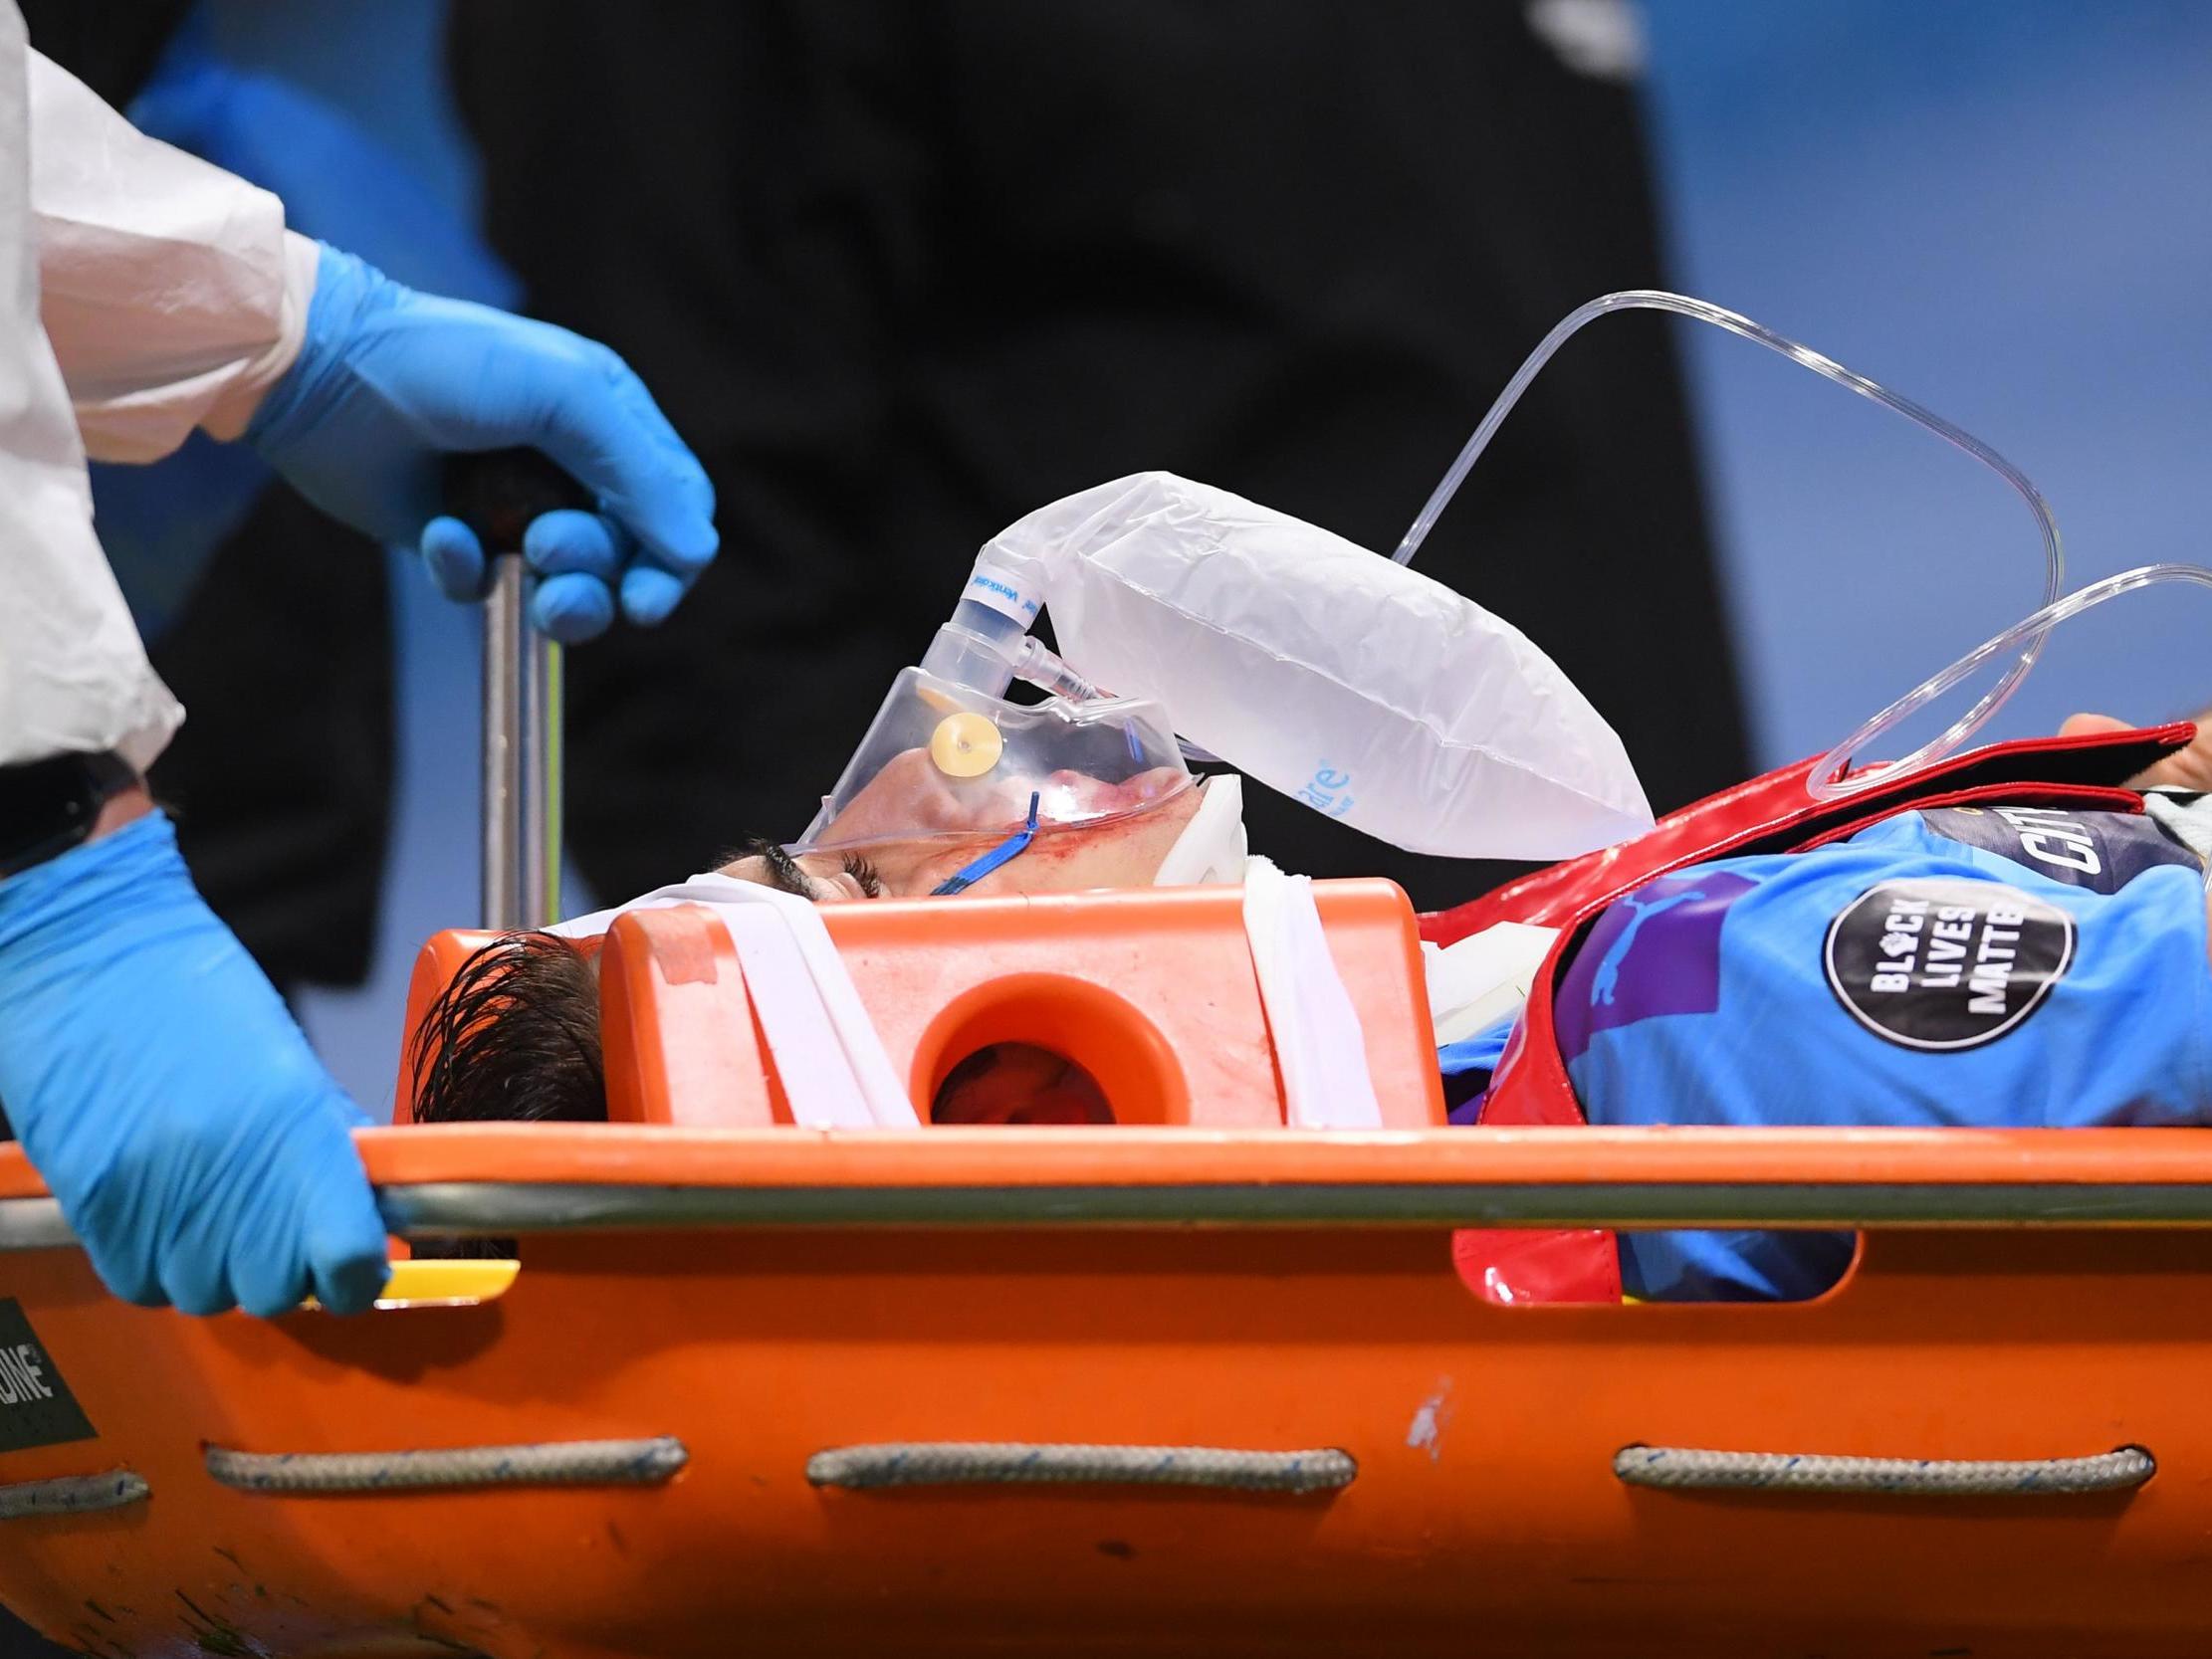 Eric Garcia was stretchered off at the Etihad